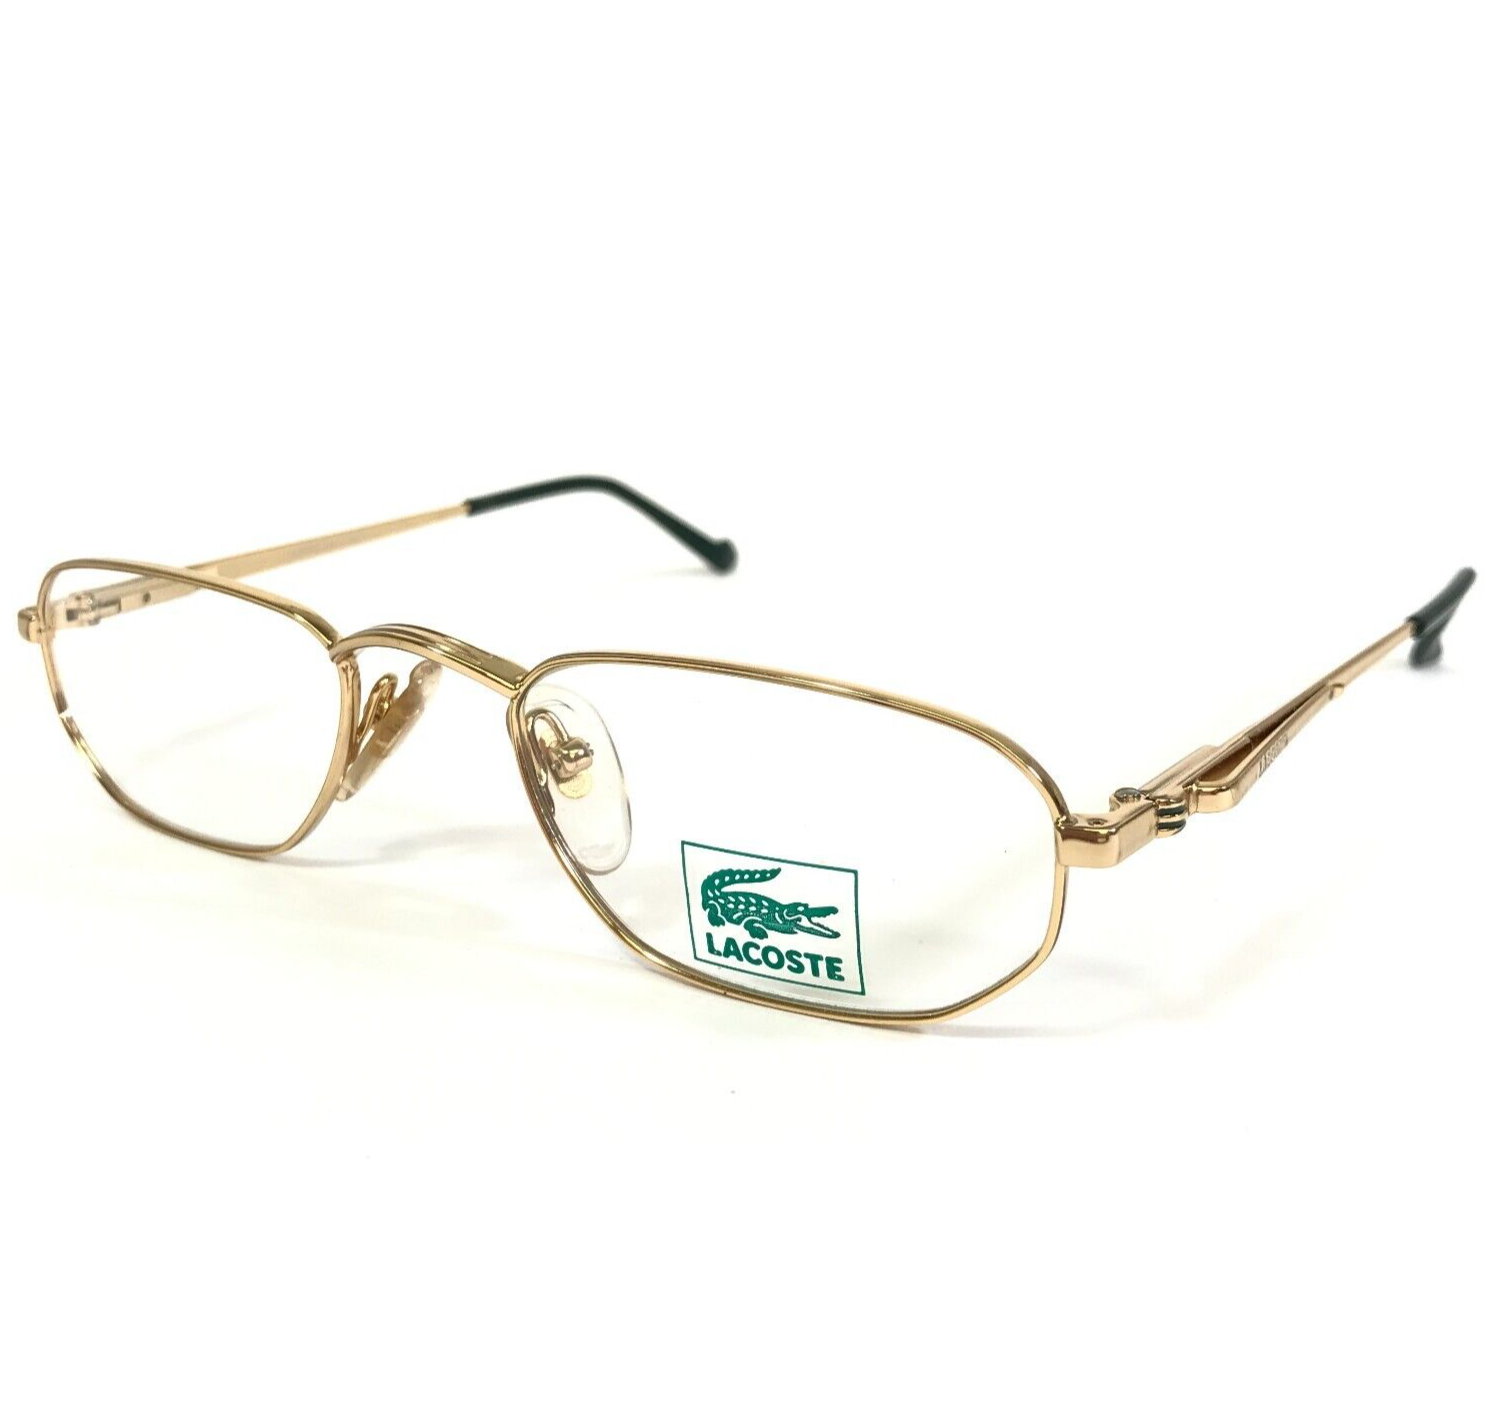 Primary image for Vintage Lacoste Eyeglasses Frames CLASSIC 7109 Gold Full Wire Rim 51-20-145